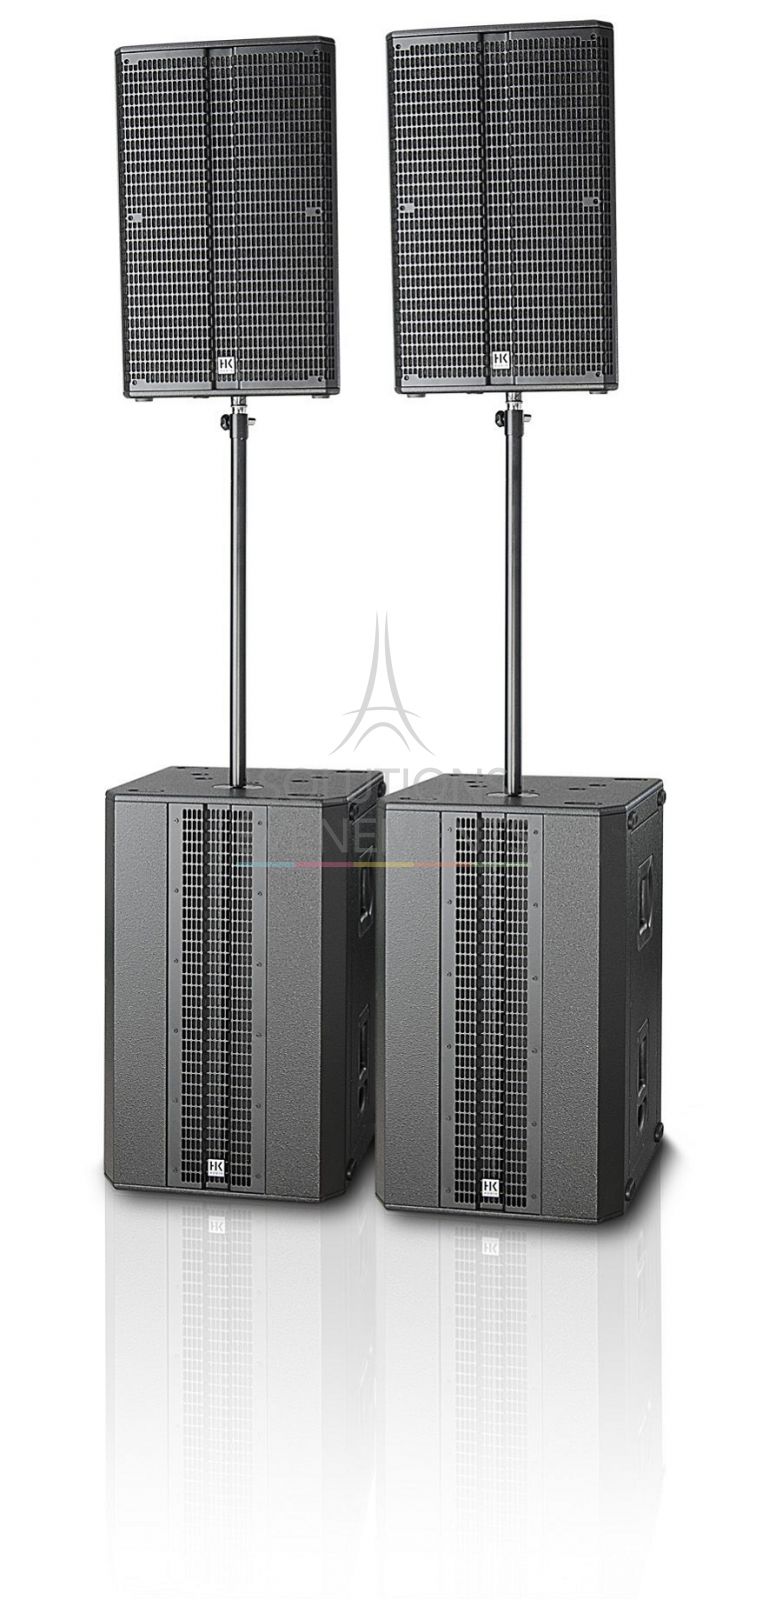 Rental of an Hk Audio amplified system - Linear 5 Power Pack